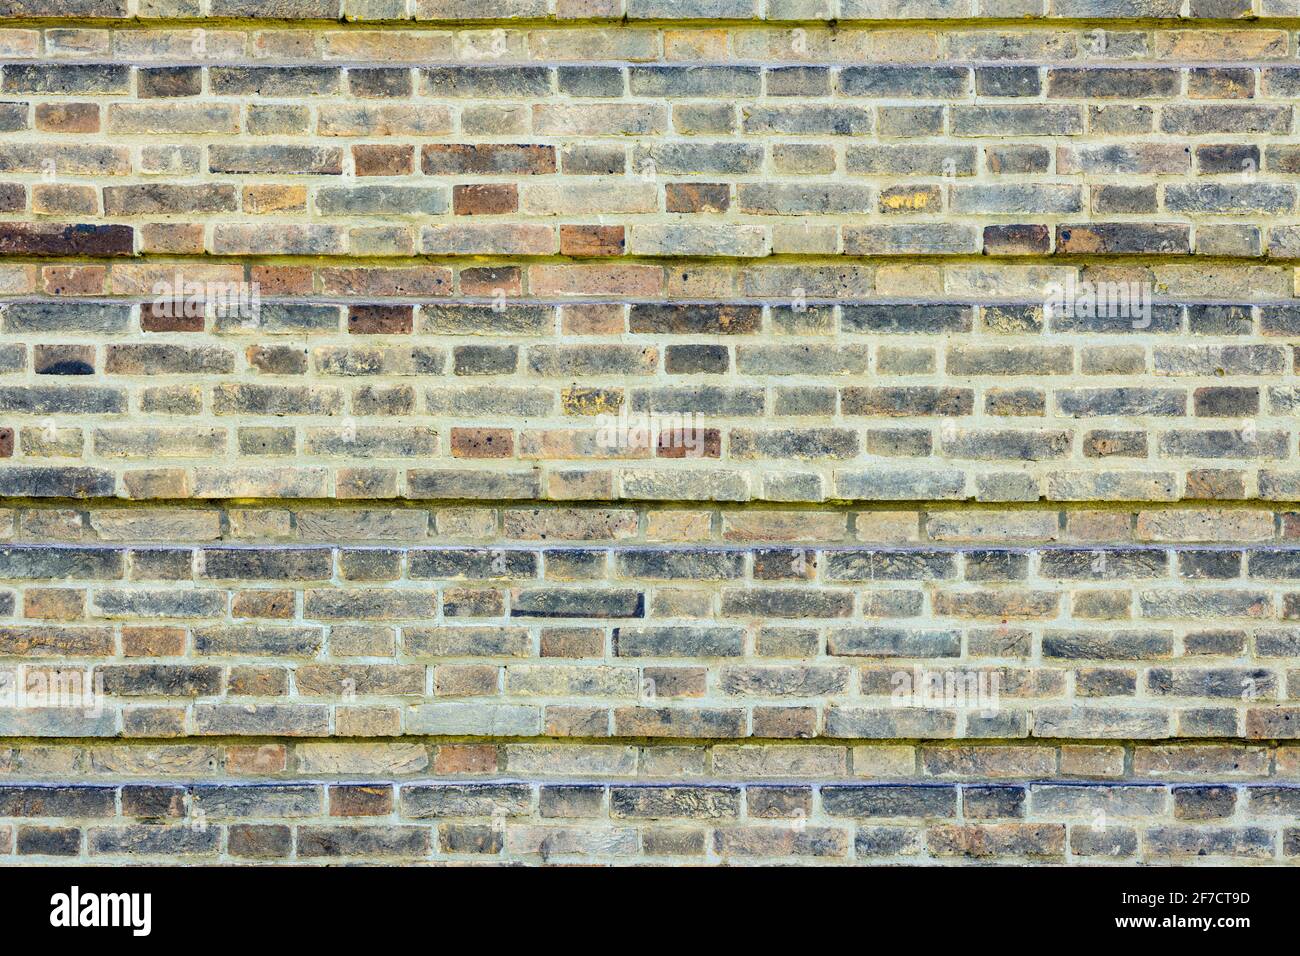 Patterned Brick wall background variety of bricks brick wall made with regular new house bricks High resolution high quality photo Stock Photo